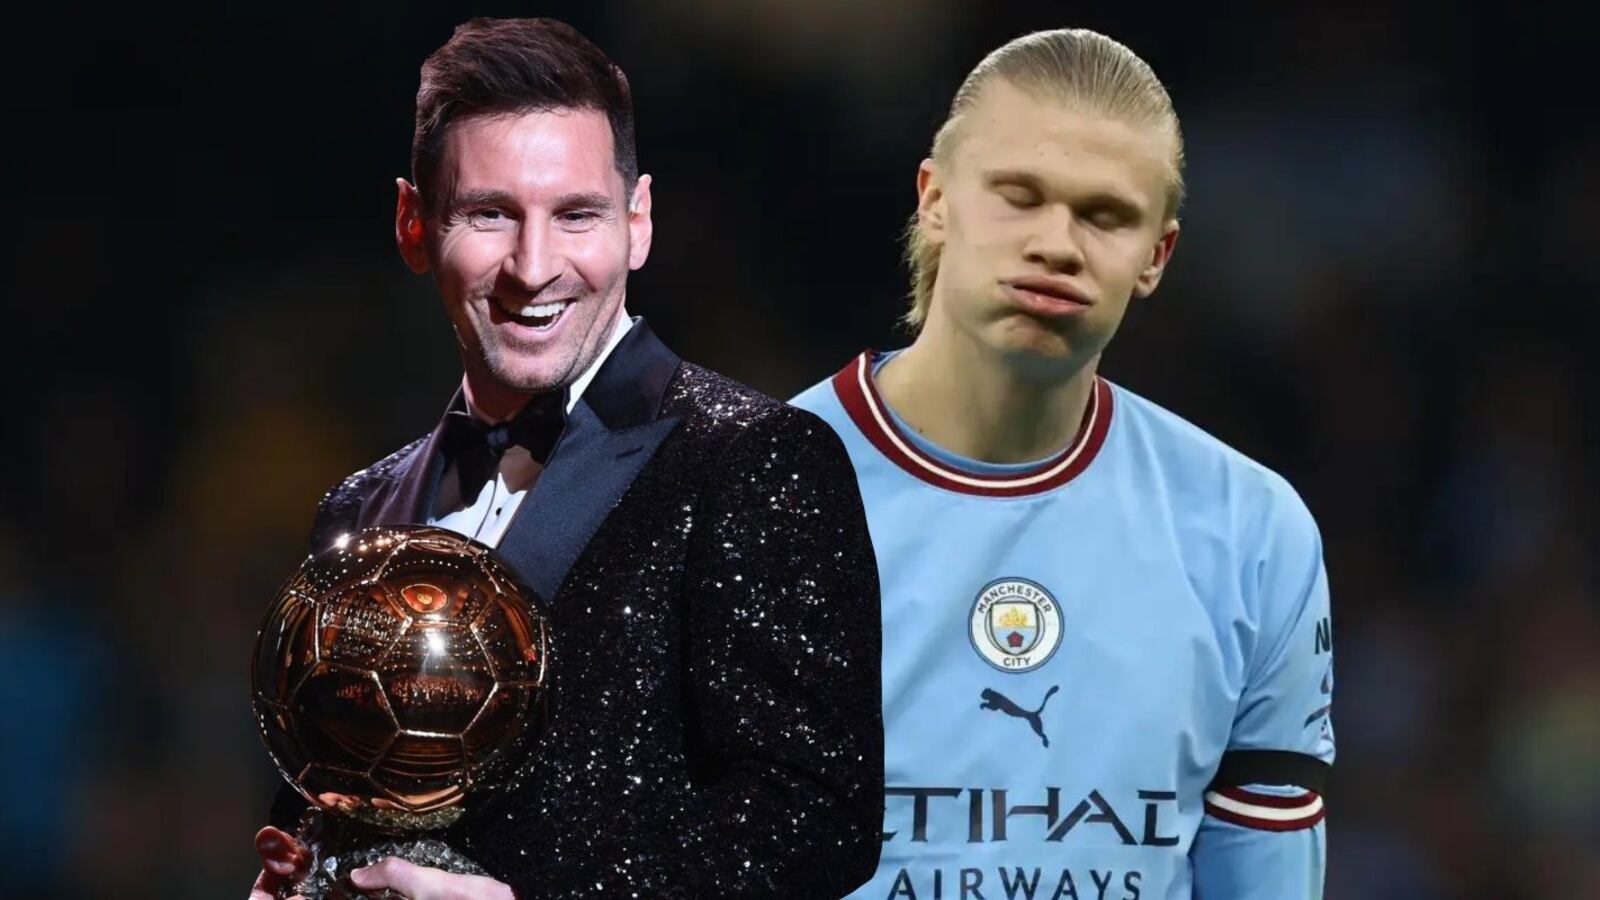 Lionel Messi will win the Ballon d'Or 2023 and this post confirms it